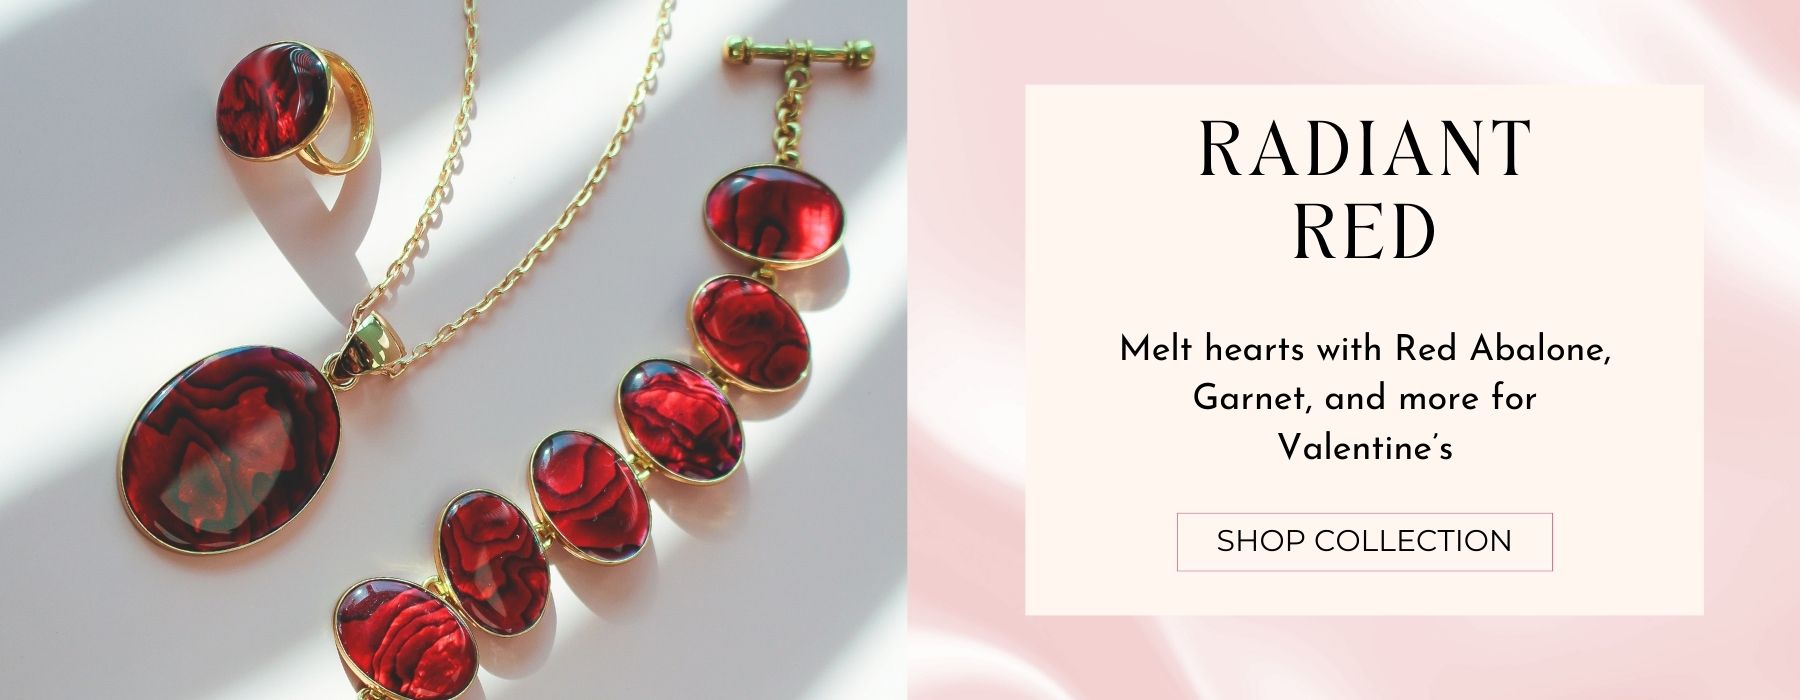 Melt hearts with Red Abalone, Garnet and more from the Valentine's Shop by Charles Albert jewelry